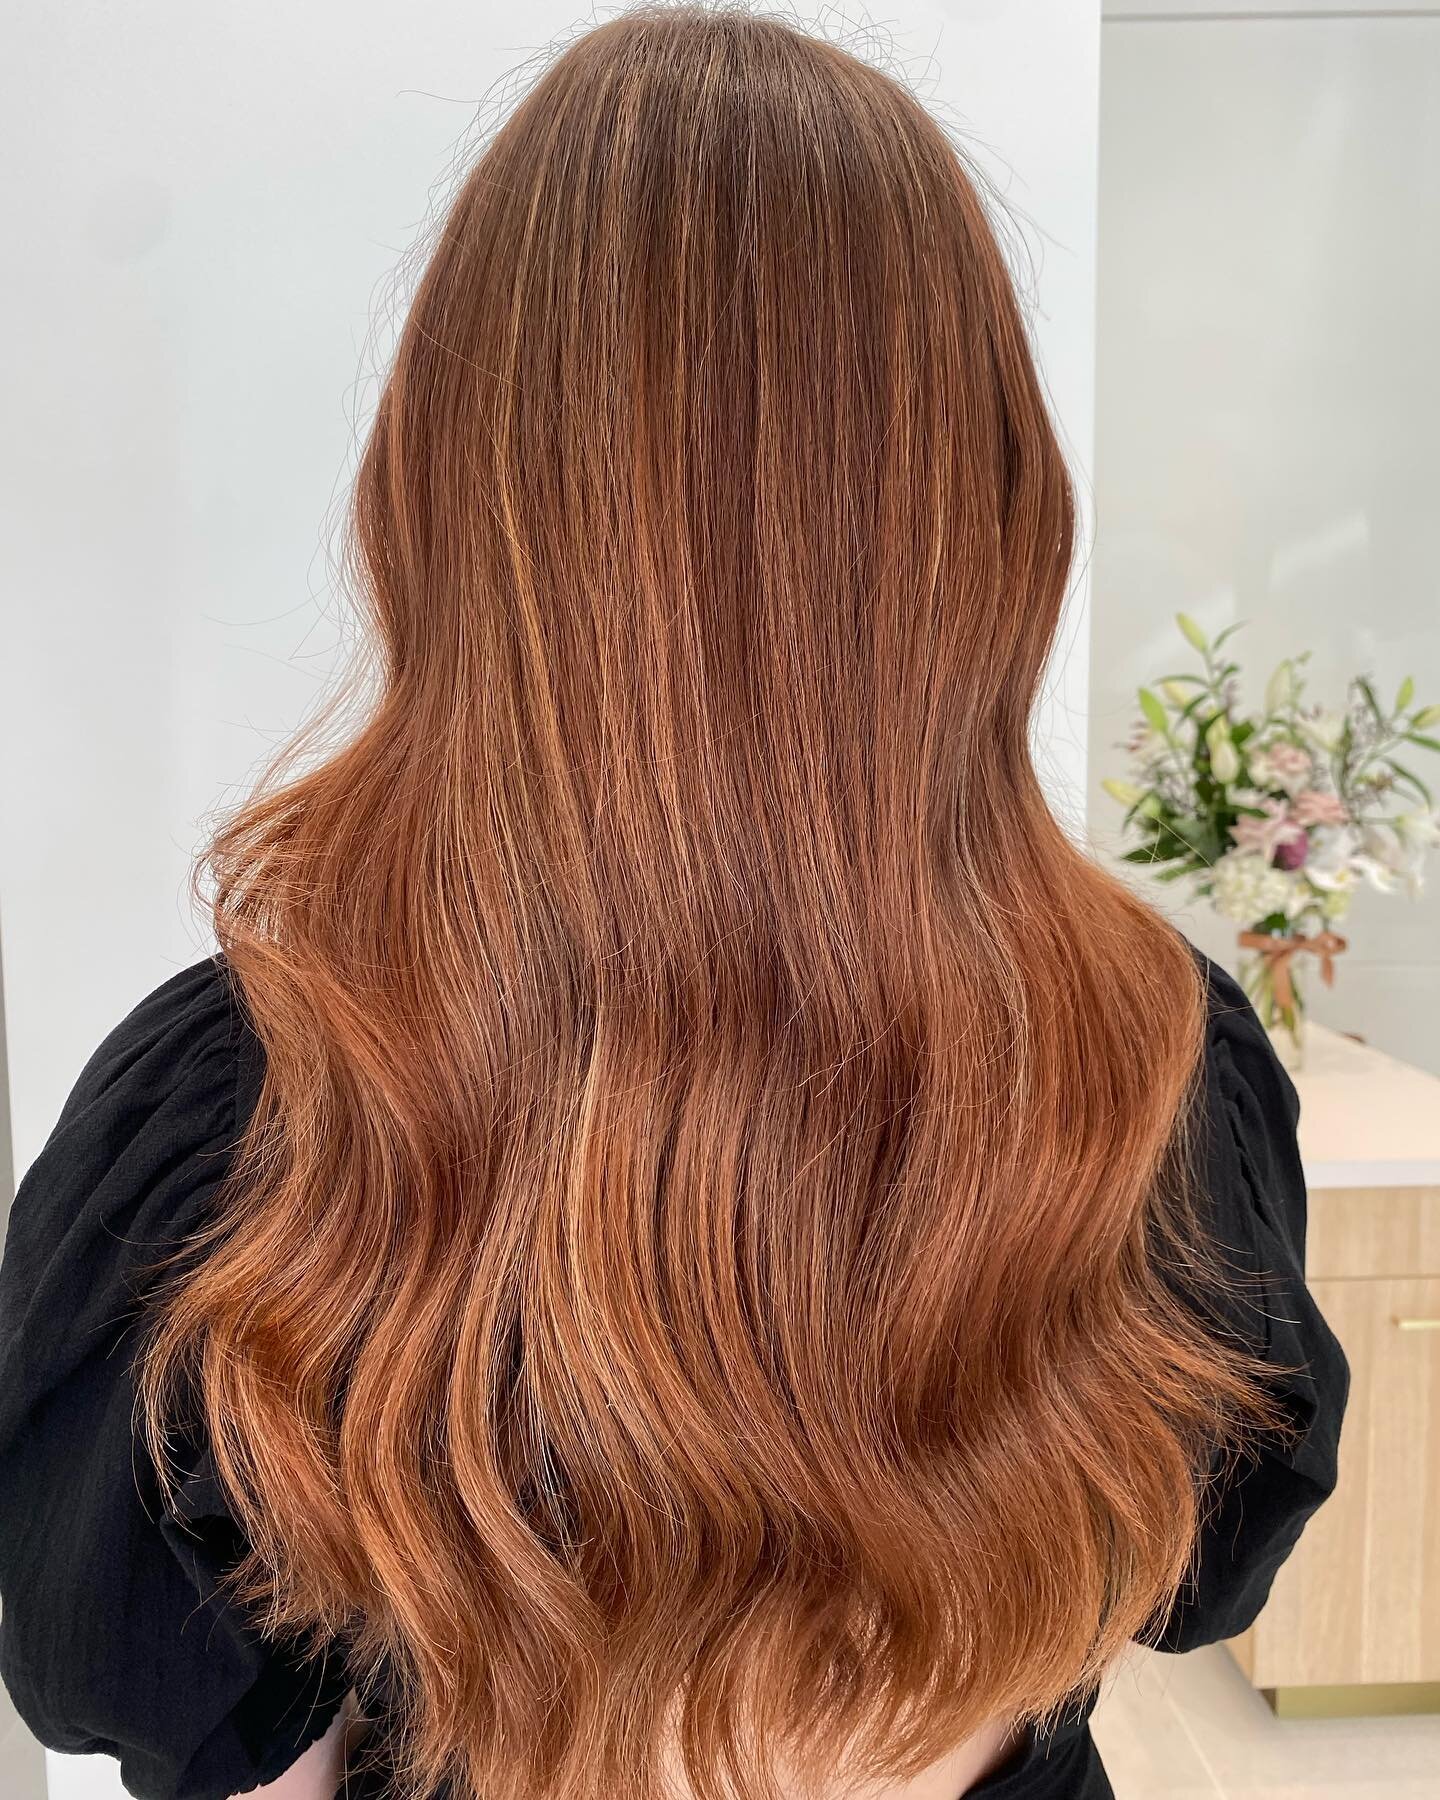 &quot;A woman who cuts her hair is about to change her life.&quot; &mdash; Coco Chanel 🧡
.
Is it just us or do you feel completely empowered when you leave a salon? 🙌
.
As you walk out and give your hair a little flick, you get this automatic boost